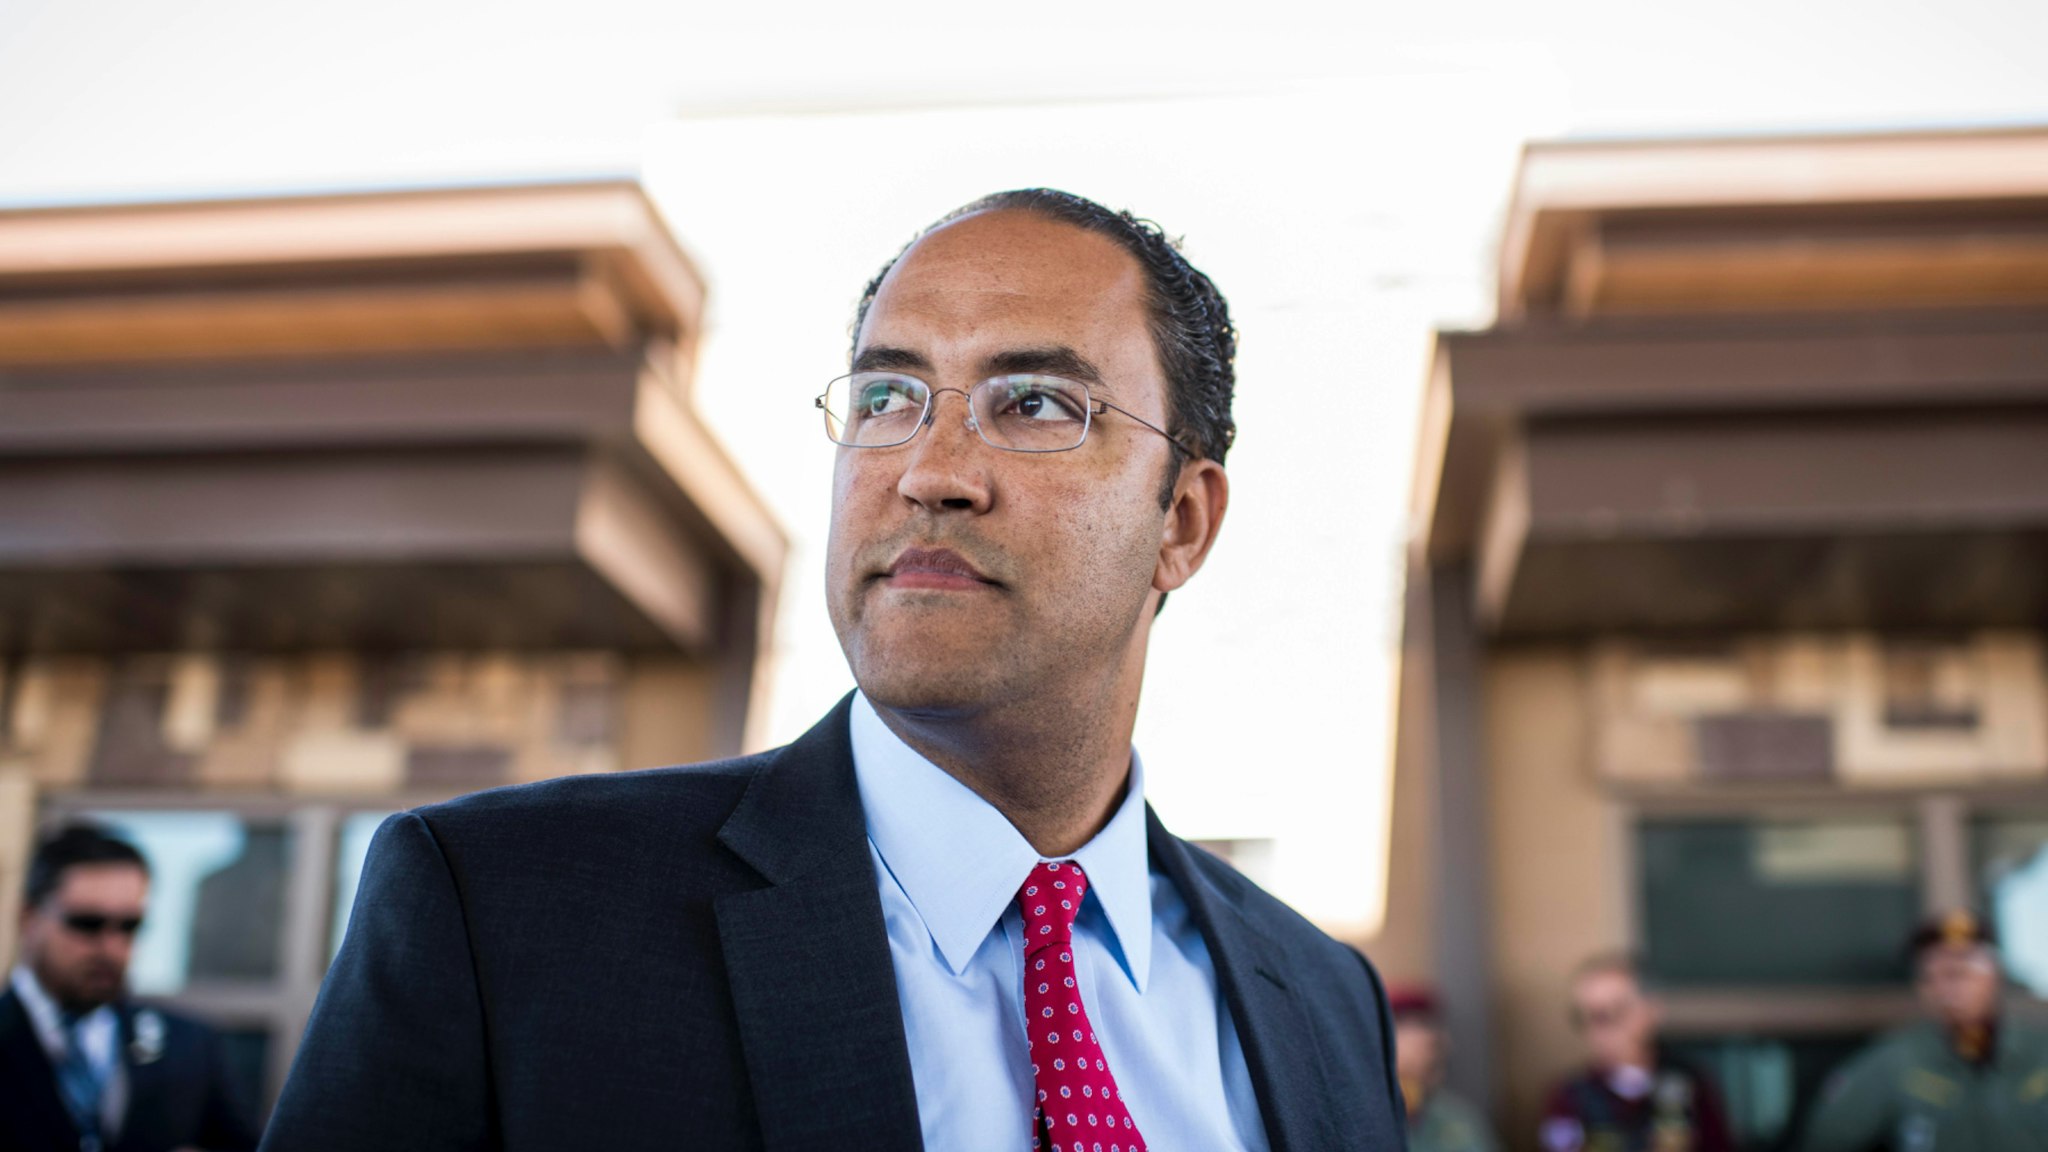 Representative Will Hurd of the 23rd Congressional District of Texas arrives to the Marcelino Serna Port of Entry Naming Ceremony on the US border with Mexico, in his constituency, in Tornillo, Texas Wednesday April 19, 2017.